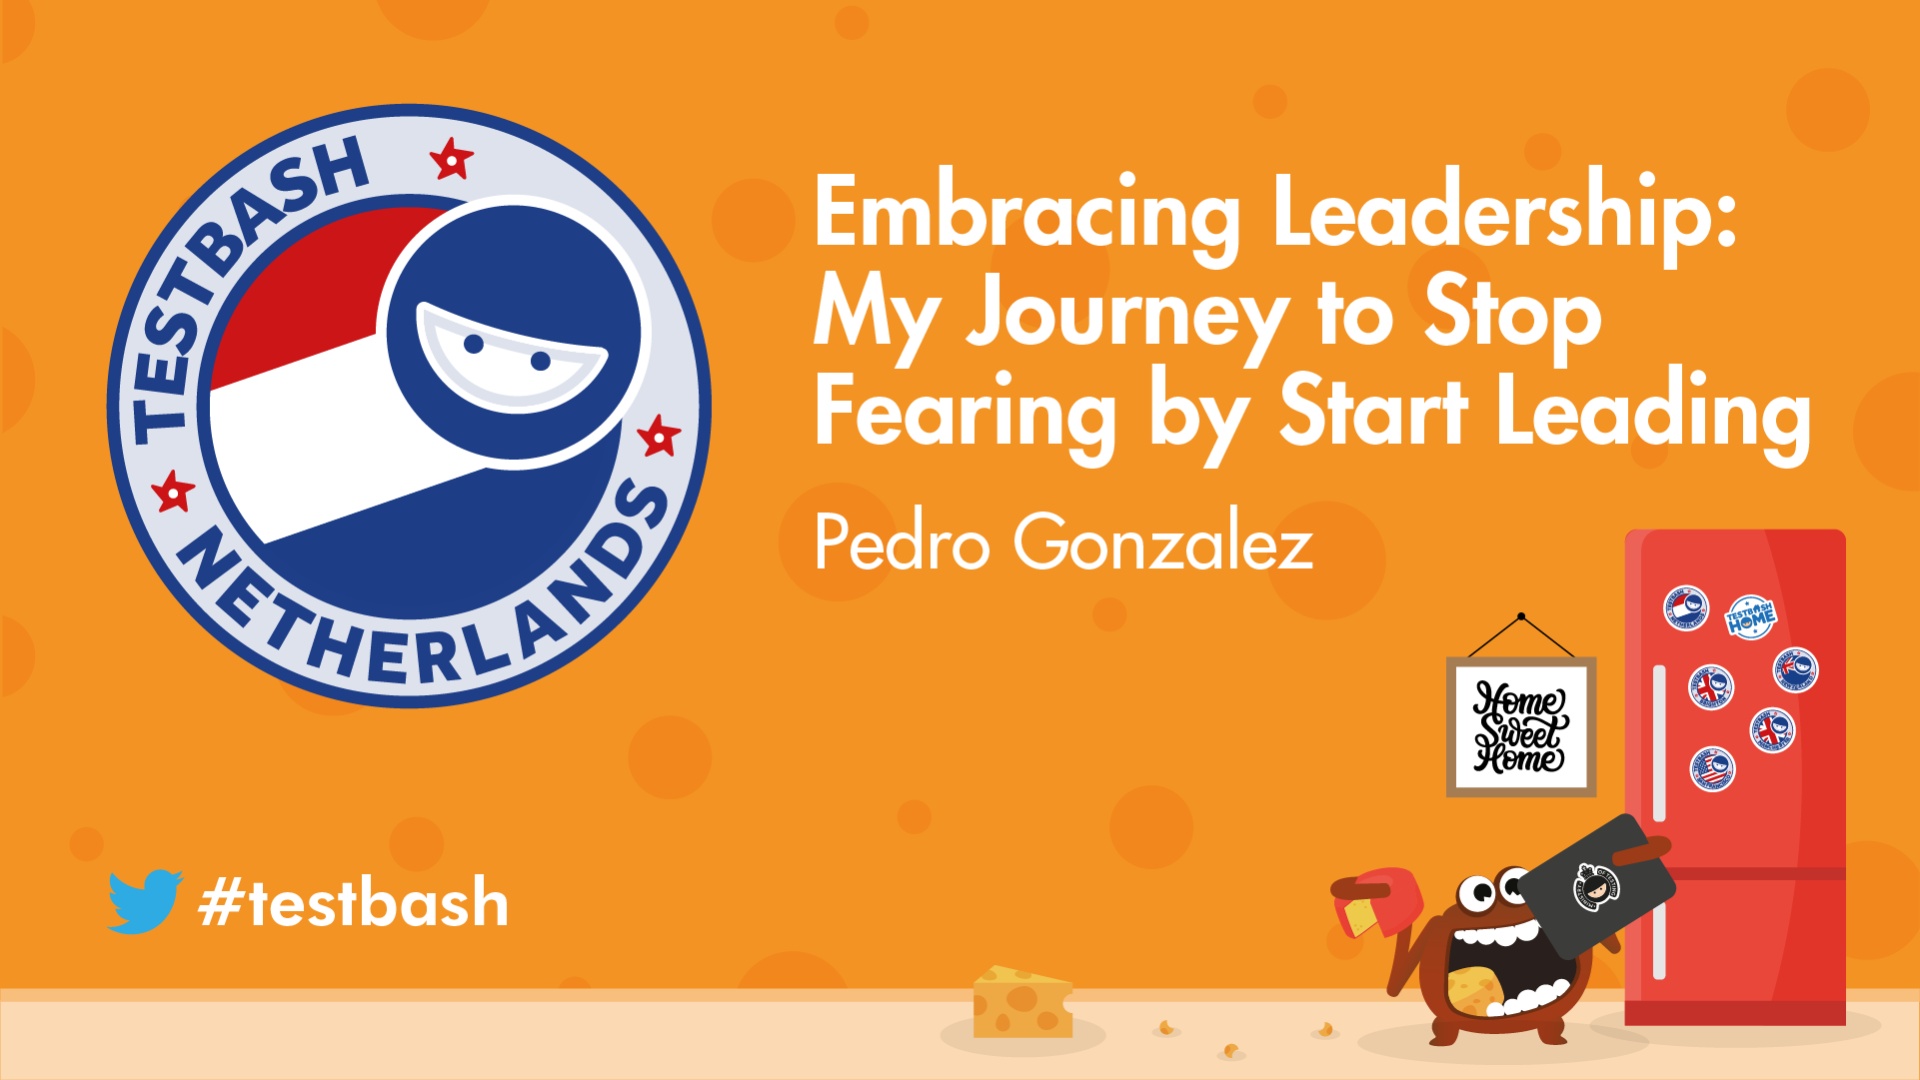 Embracing Leadership: My Journey to Stop Fearing and Start Leading - Pedro Gonzalez